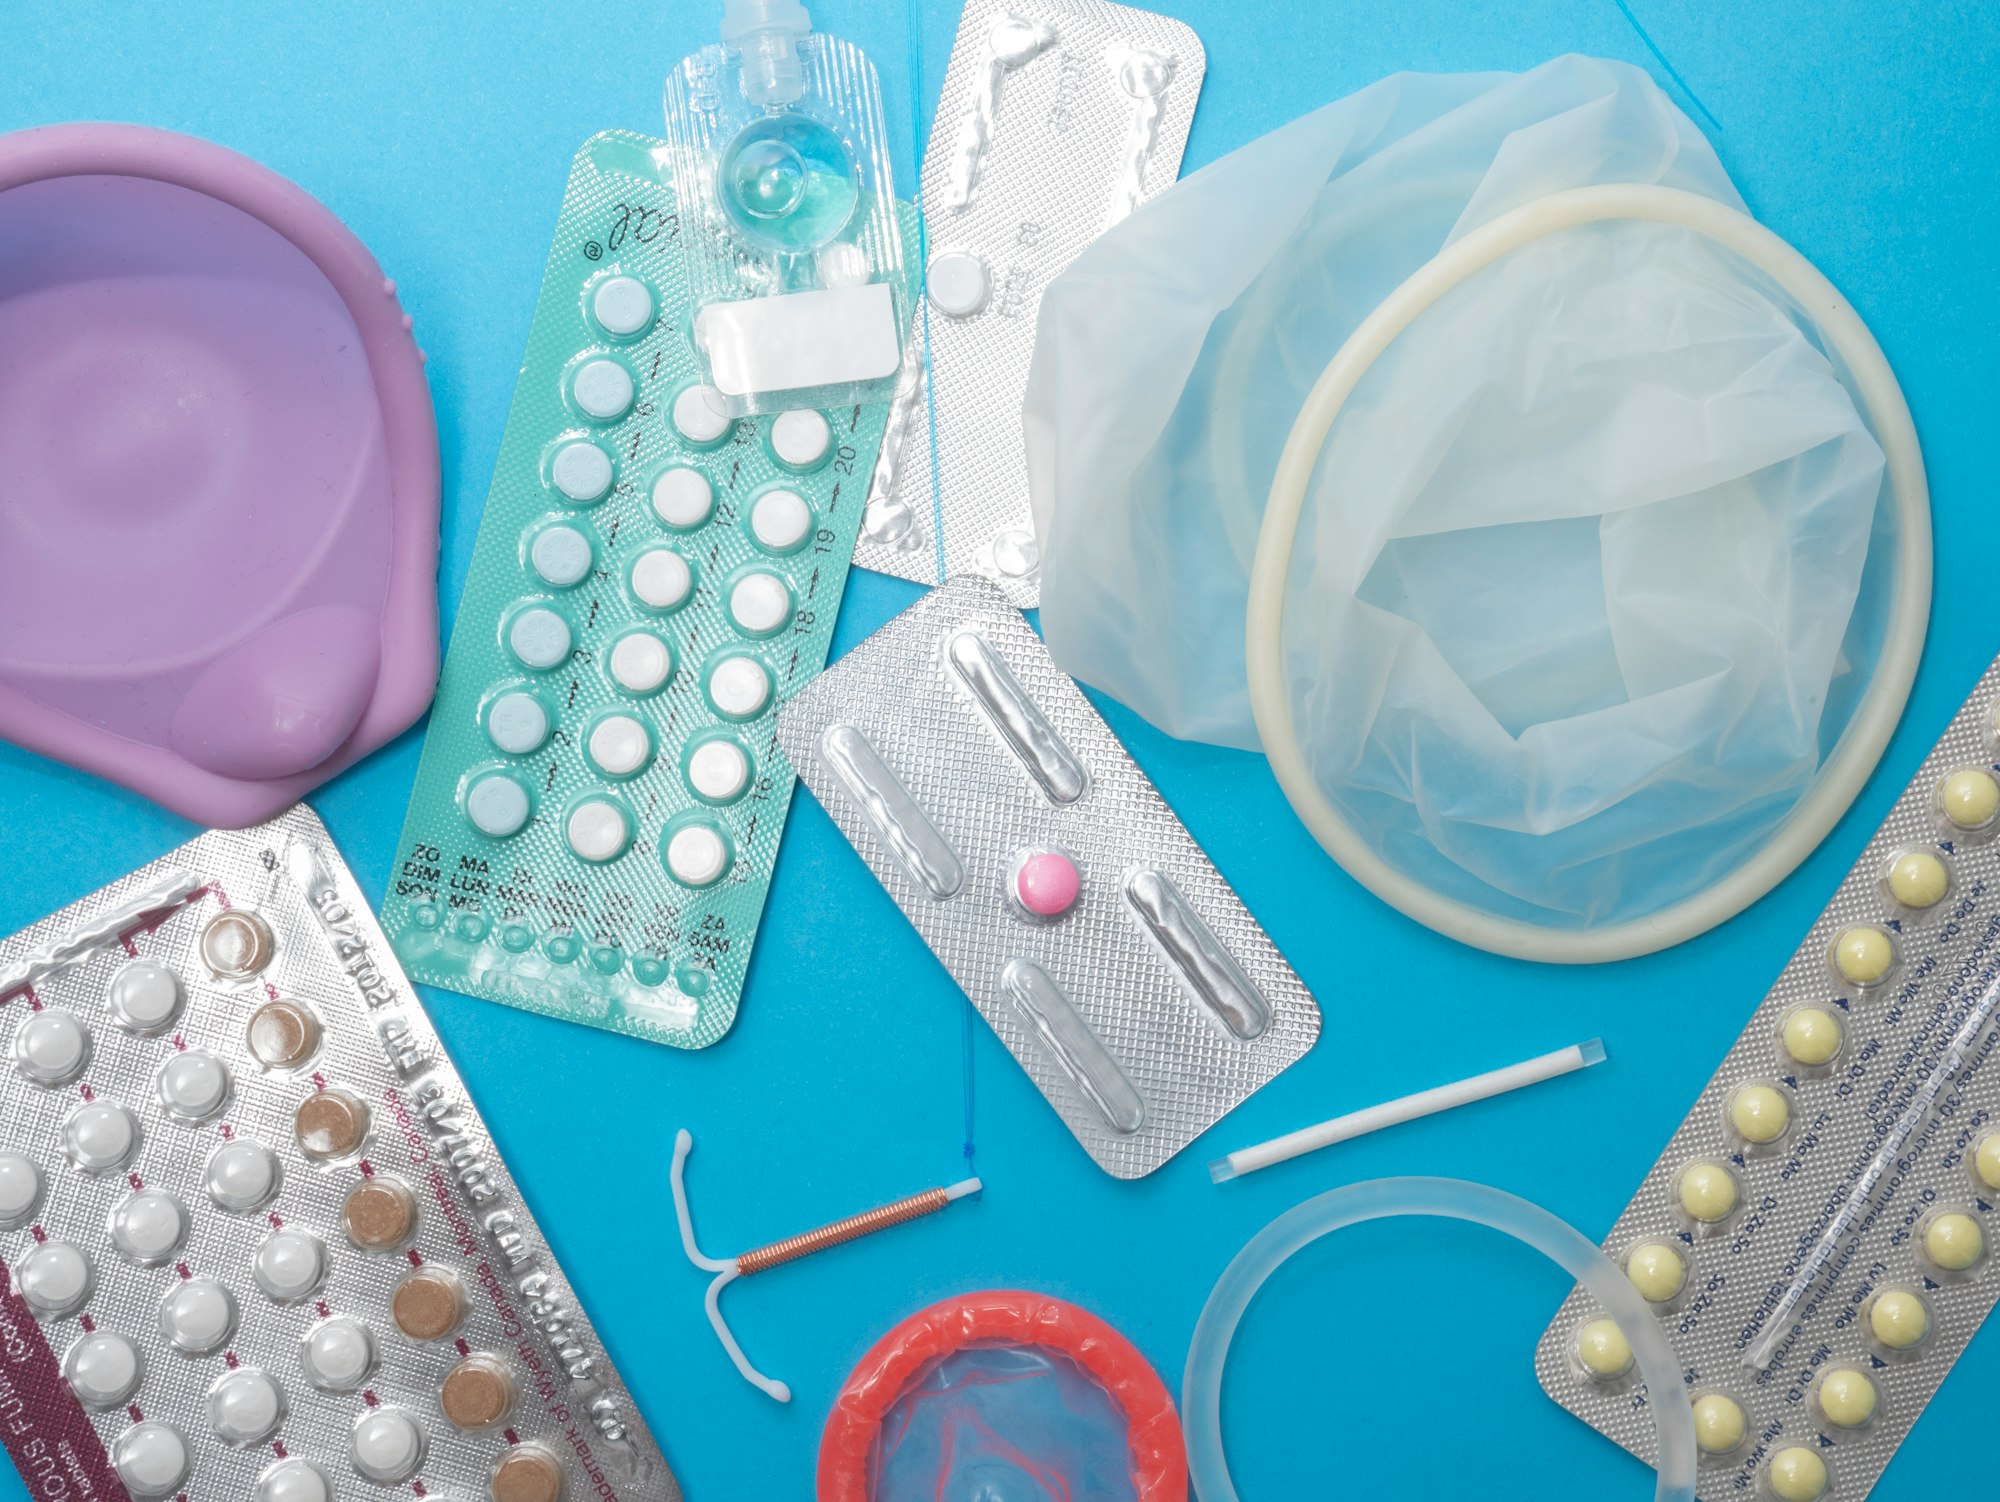 Shaping the Future of Contraception